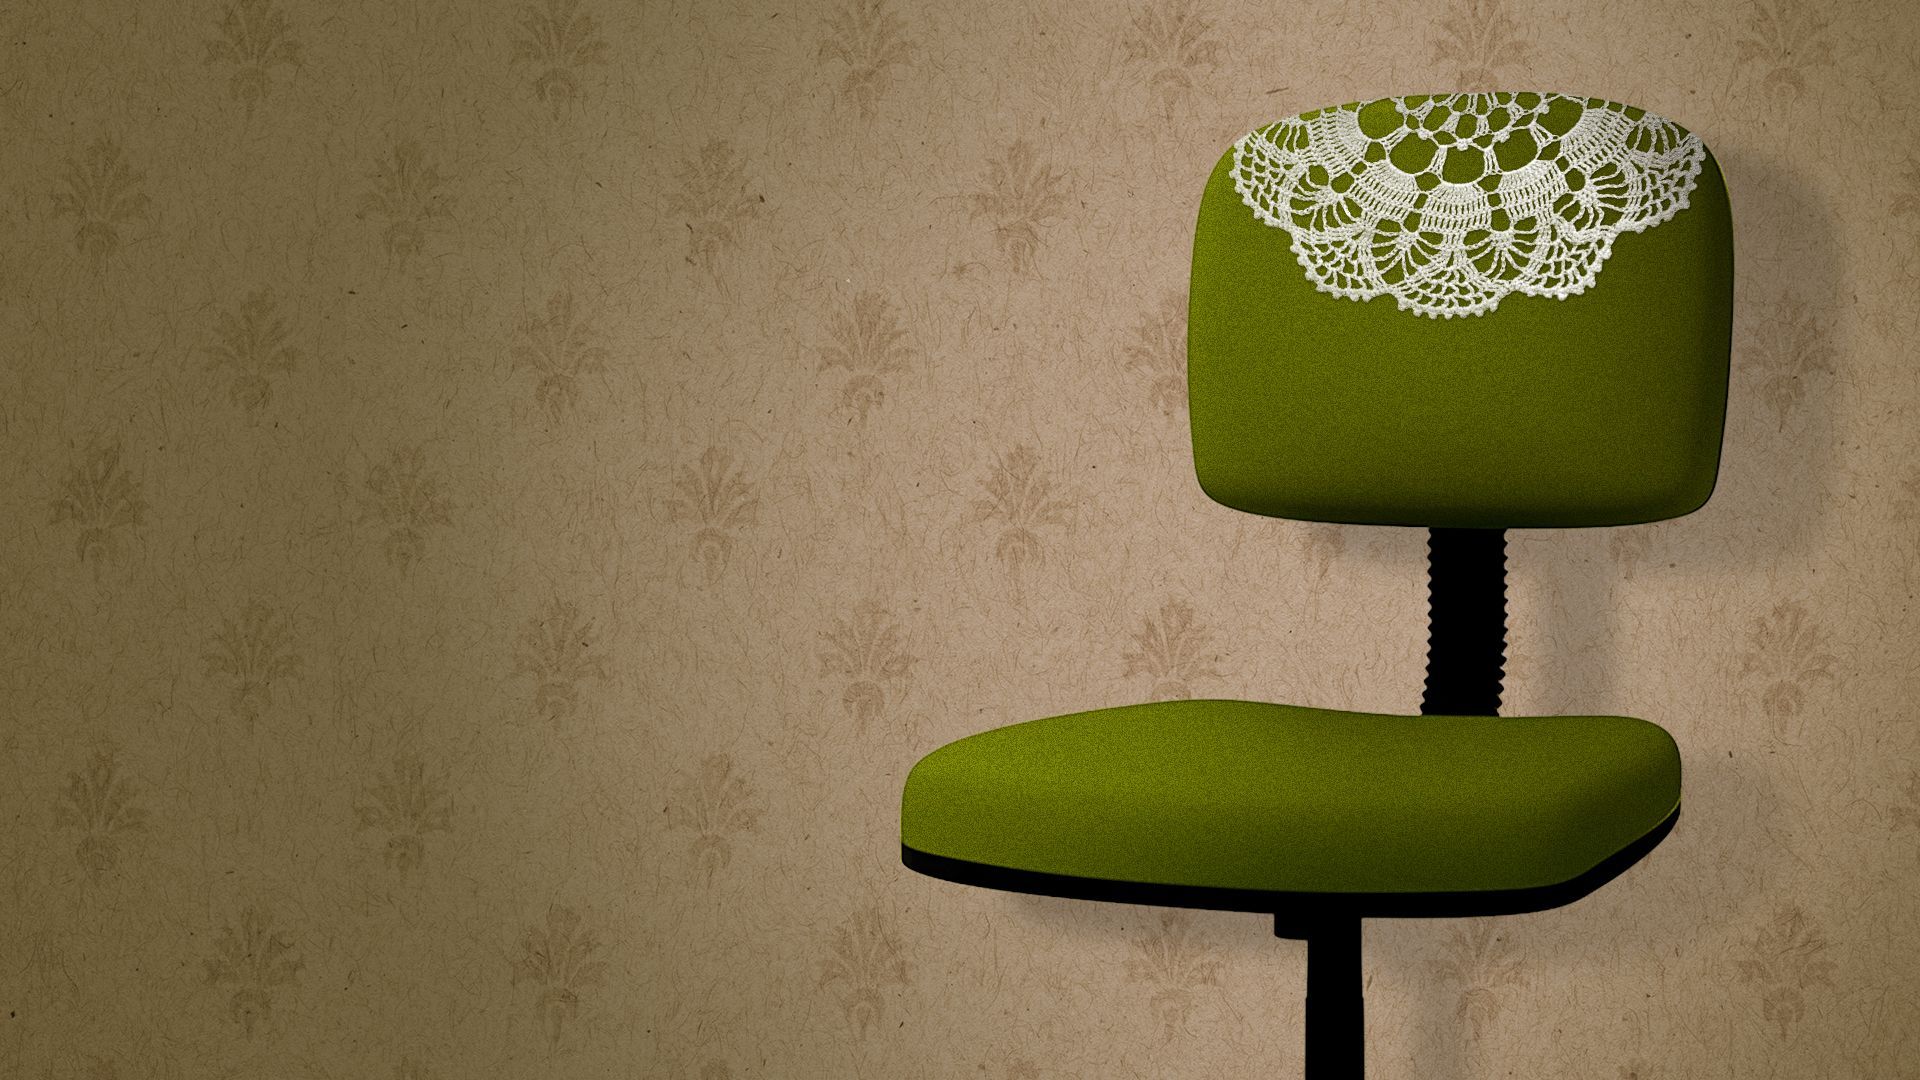 Illustration of an office chair with a doily on top, sitting on front of vintage wallpaper.